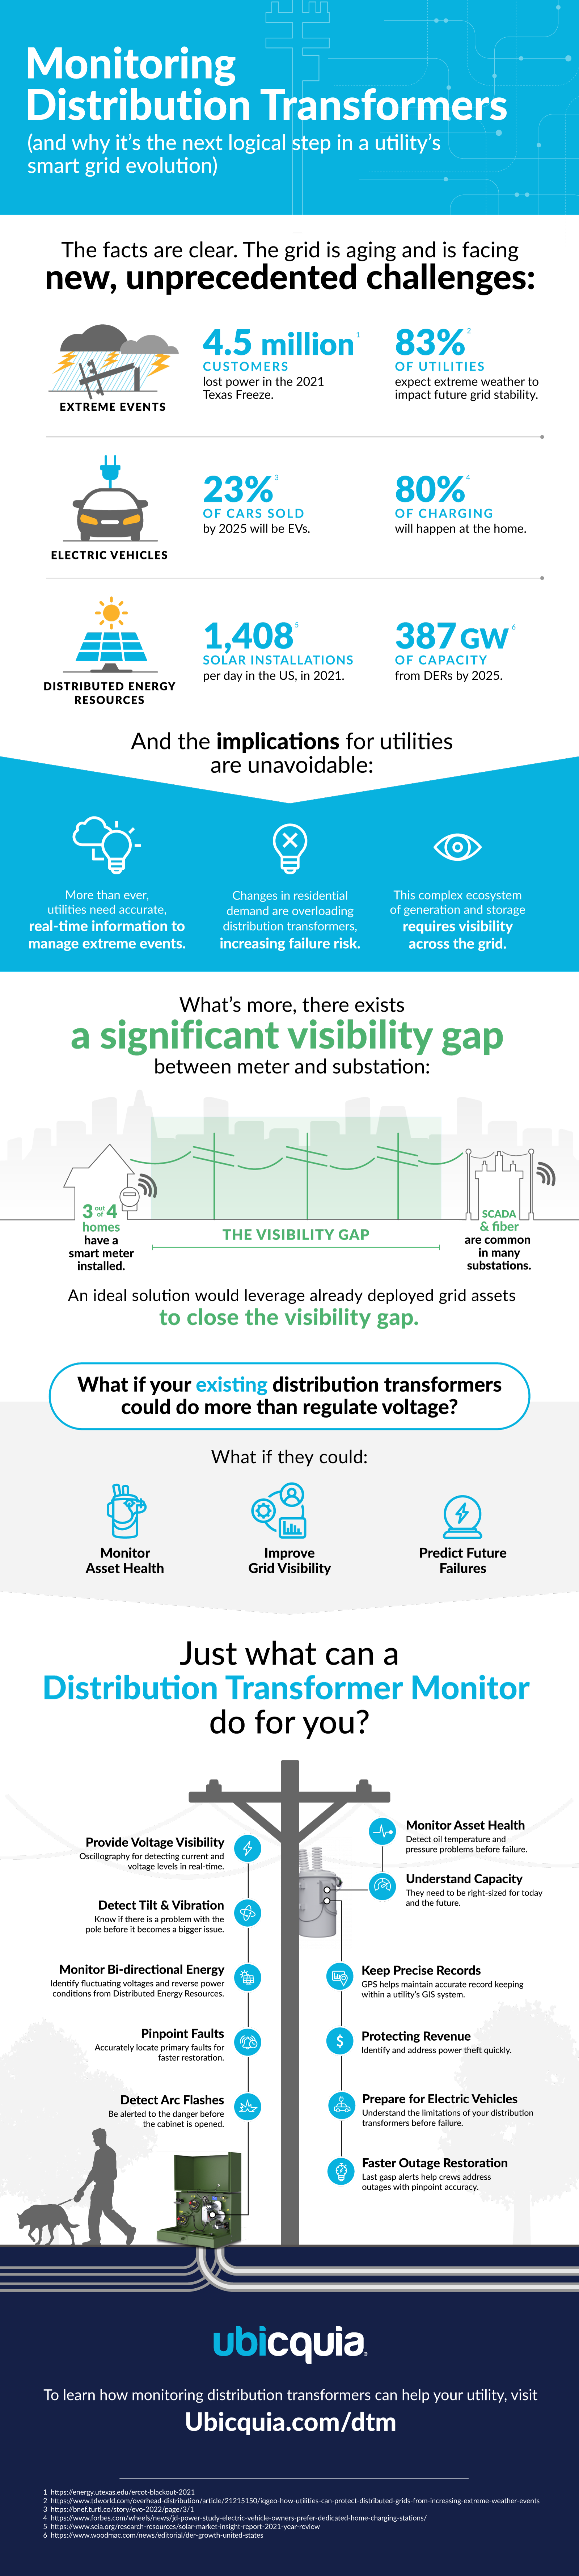 Monitoring distribution transformers infographic